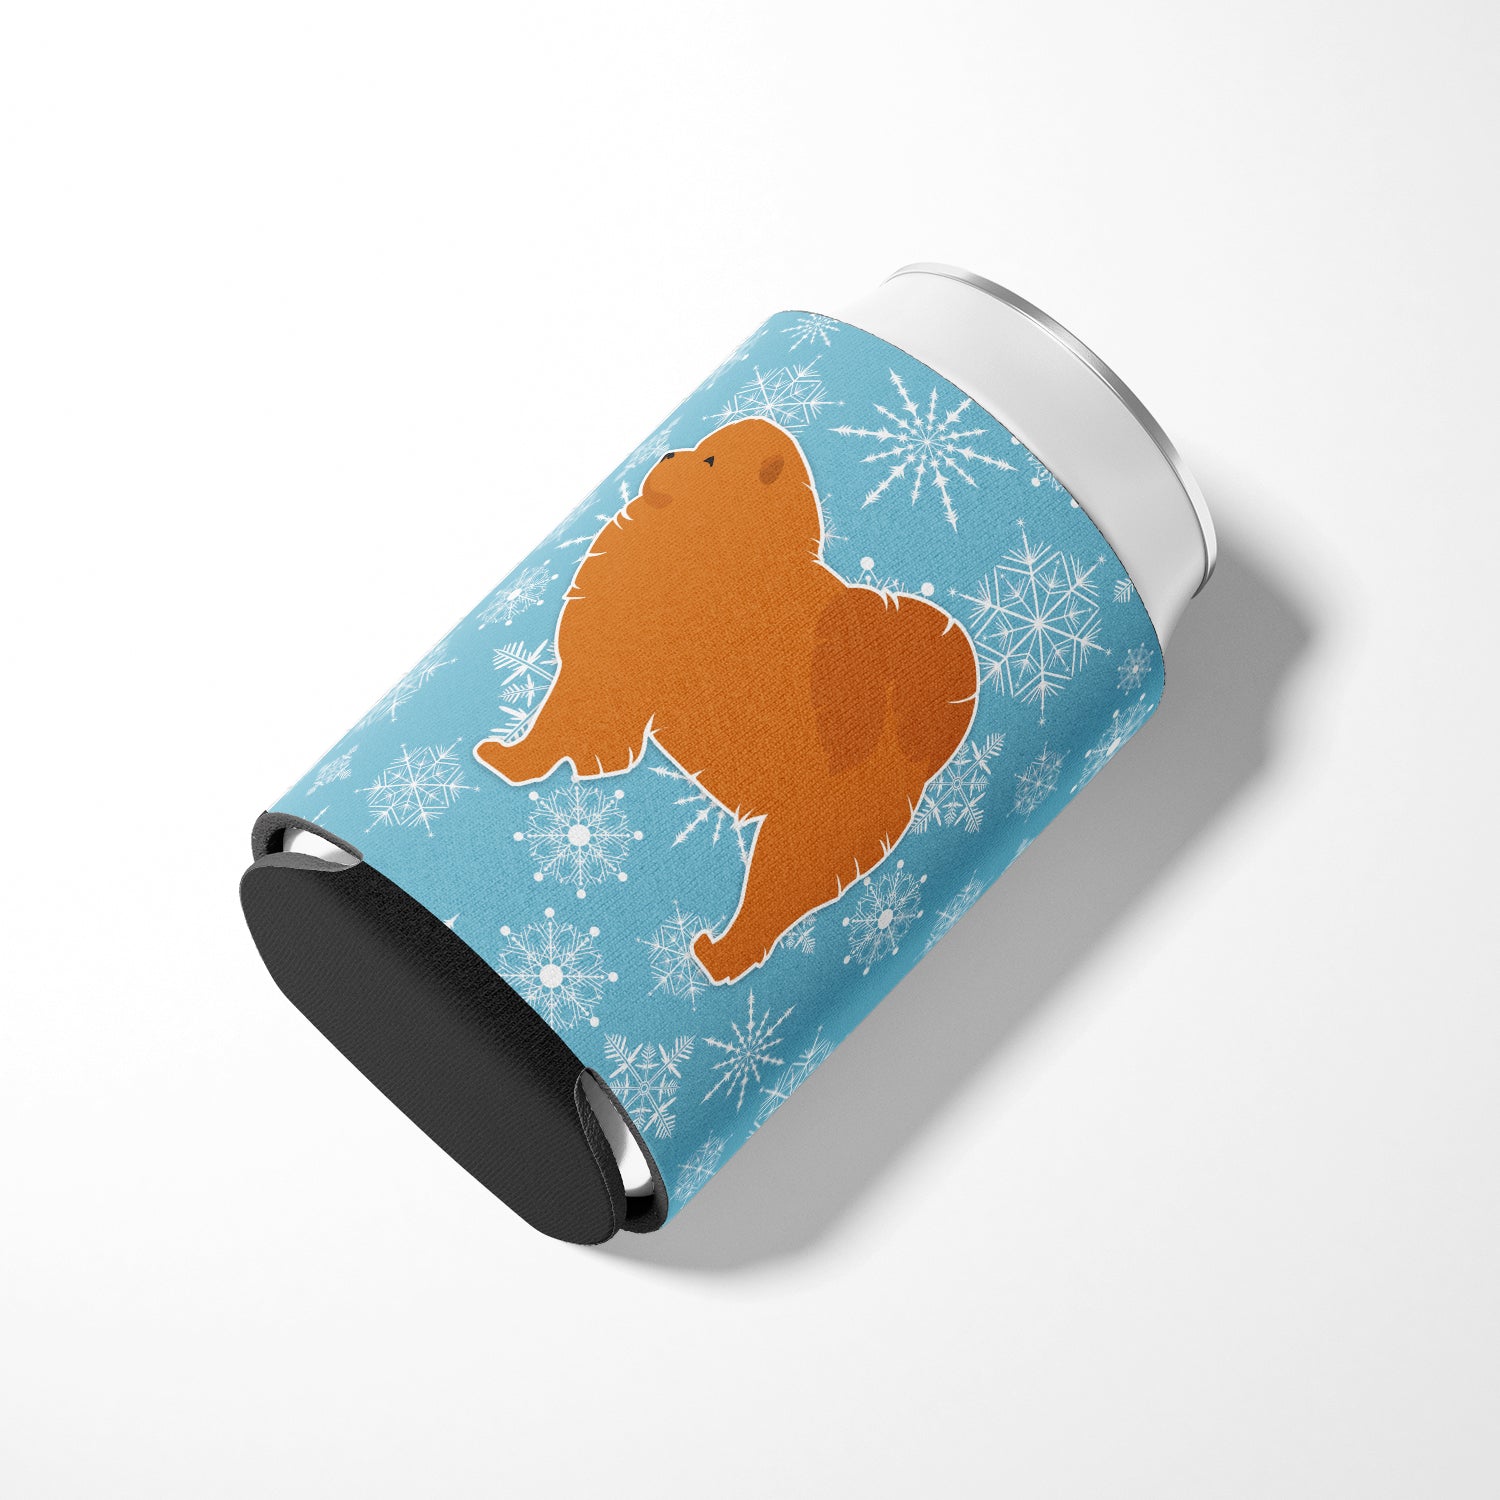 Winter Snowflake Chow Chow Can or Bottle Hugger BB3551CC  the-store.com.